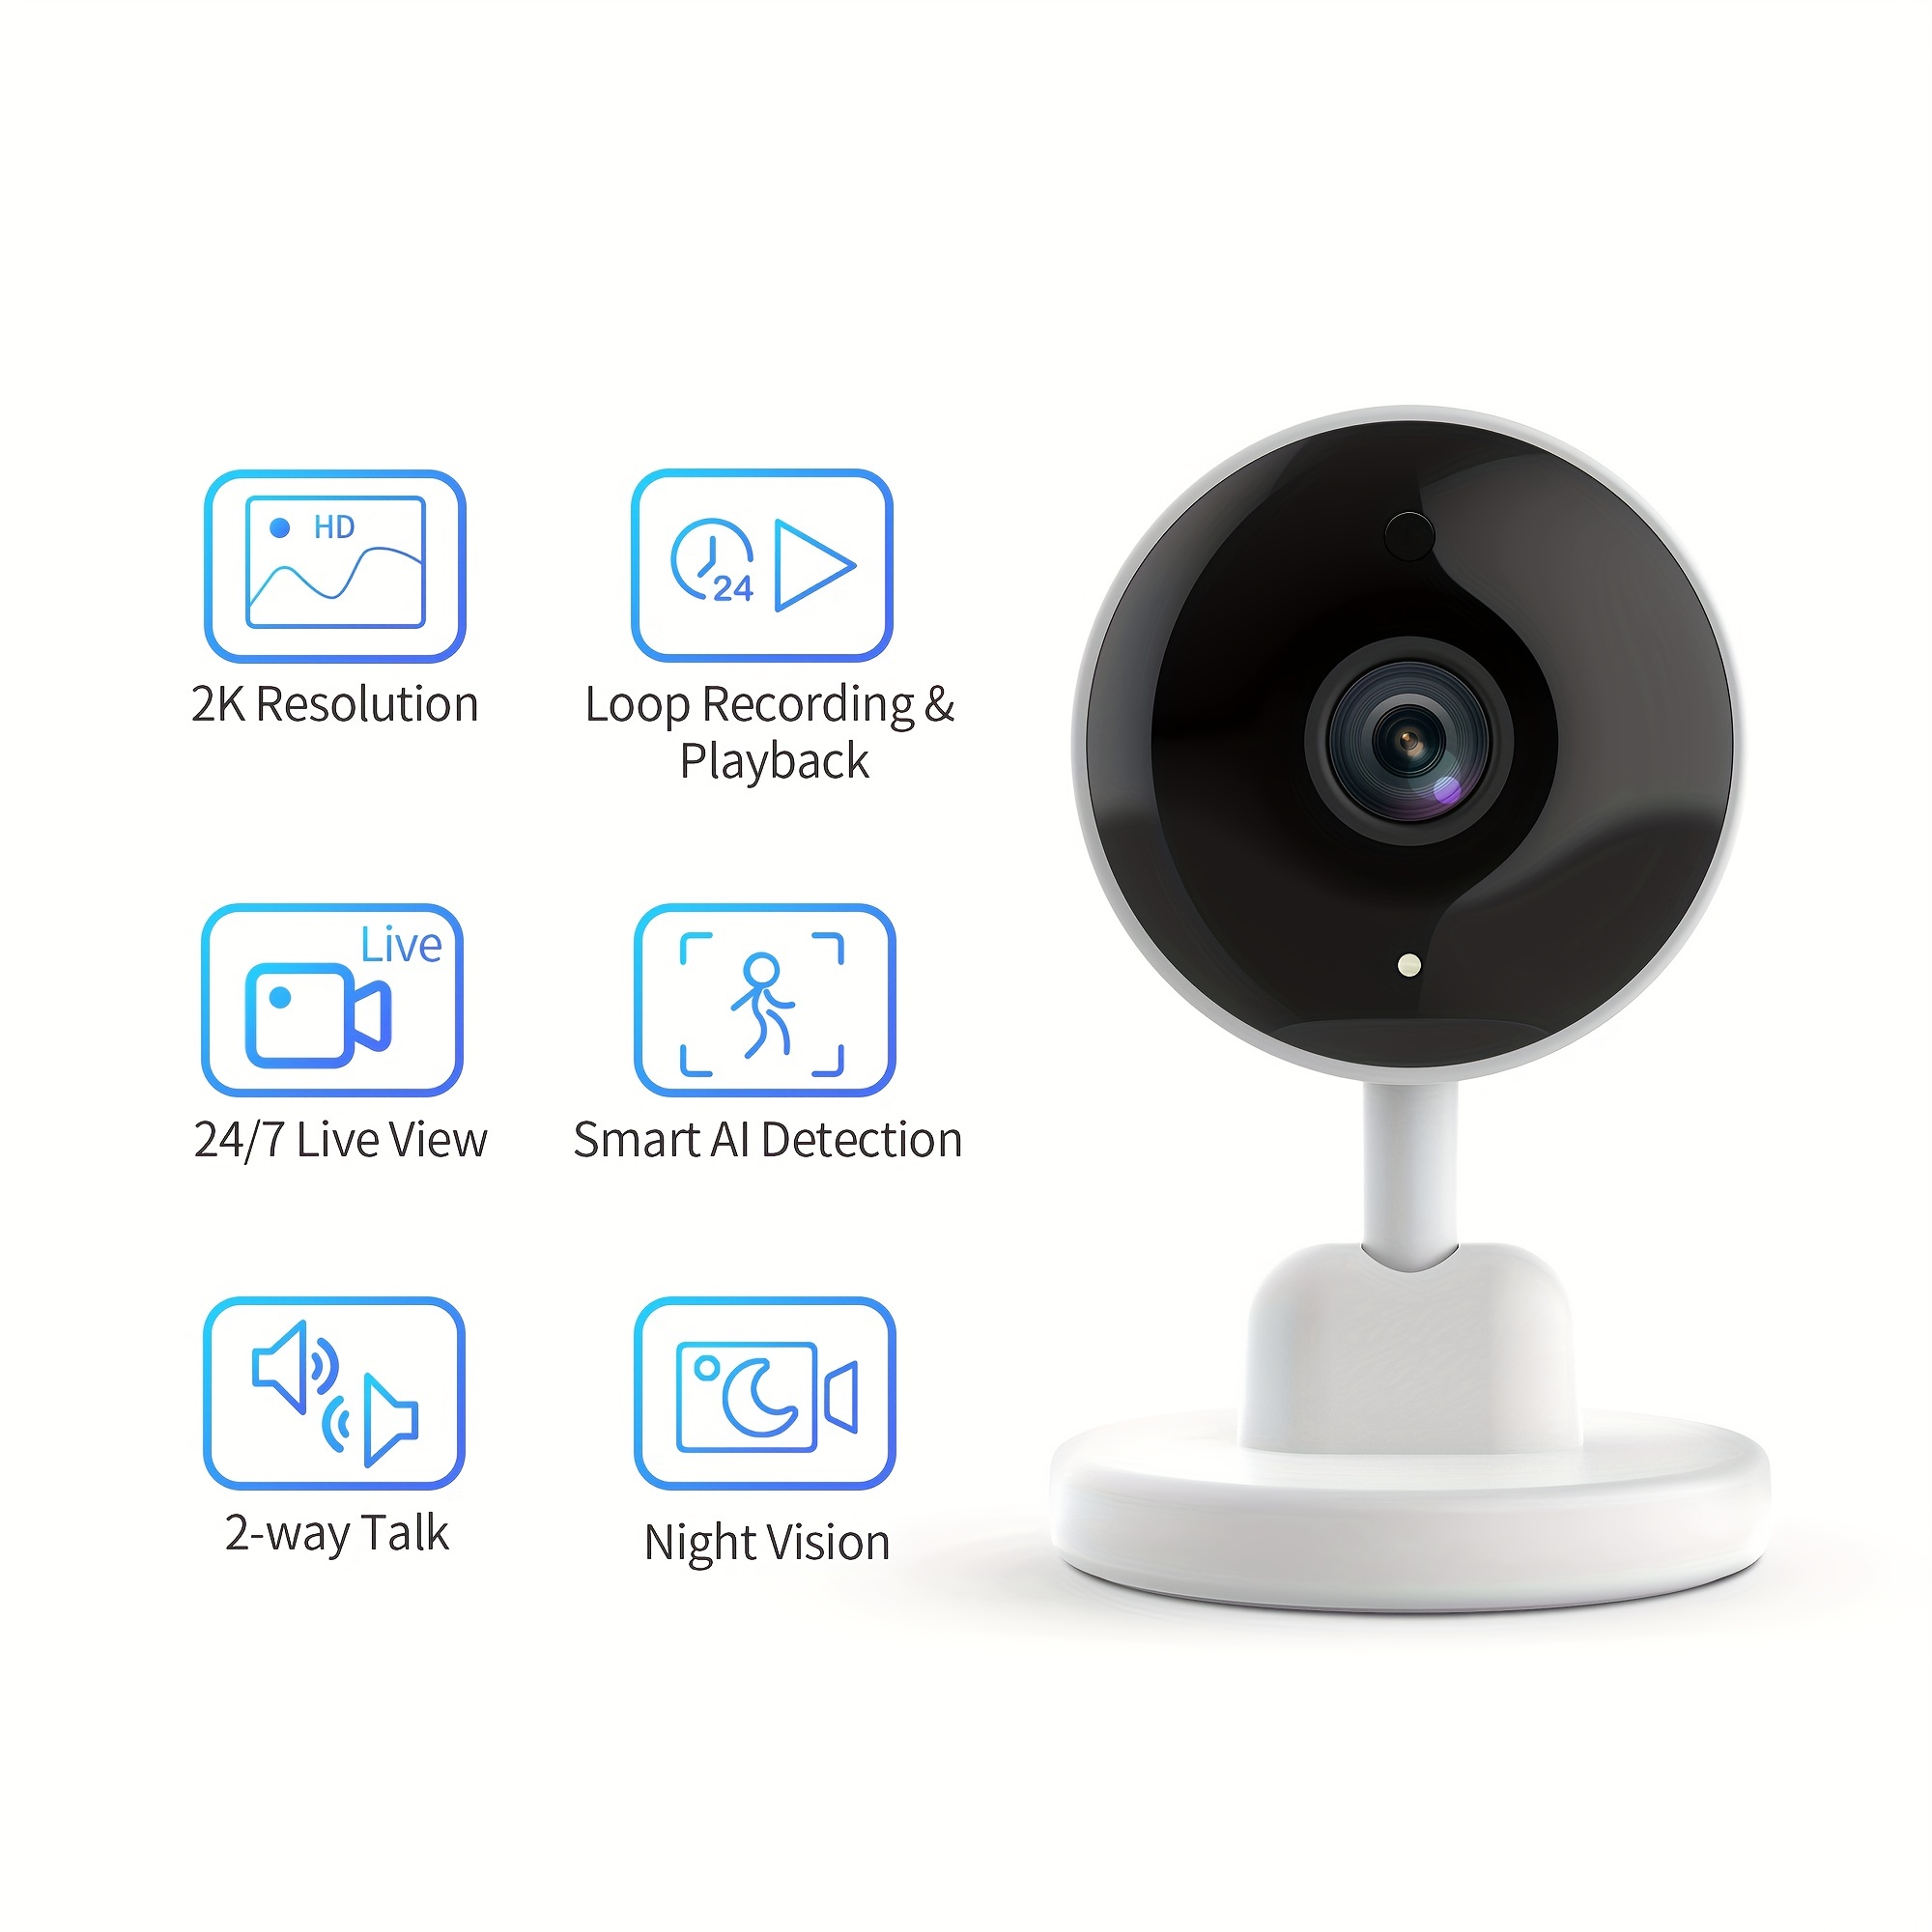 NETVUE Outdoor Security Surveillance Camera- 2.4G WiFi 360° View Pan Tilt  Camera, Compatible with Alexa, Two-Way Audio, Color Night Vision